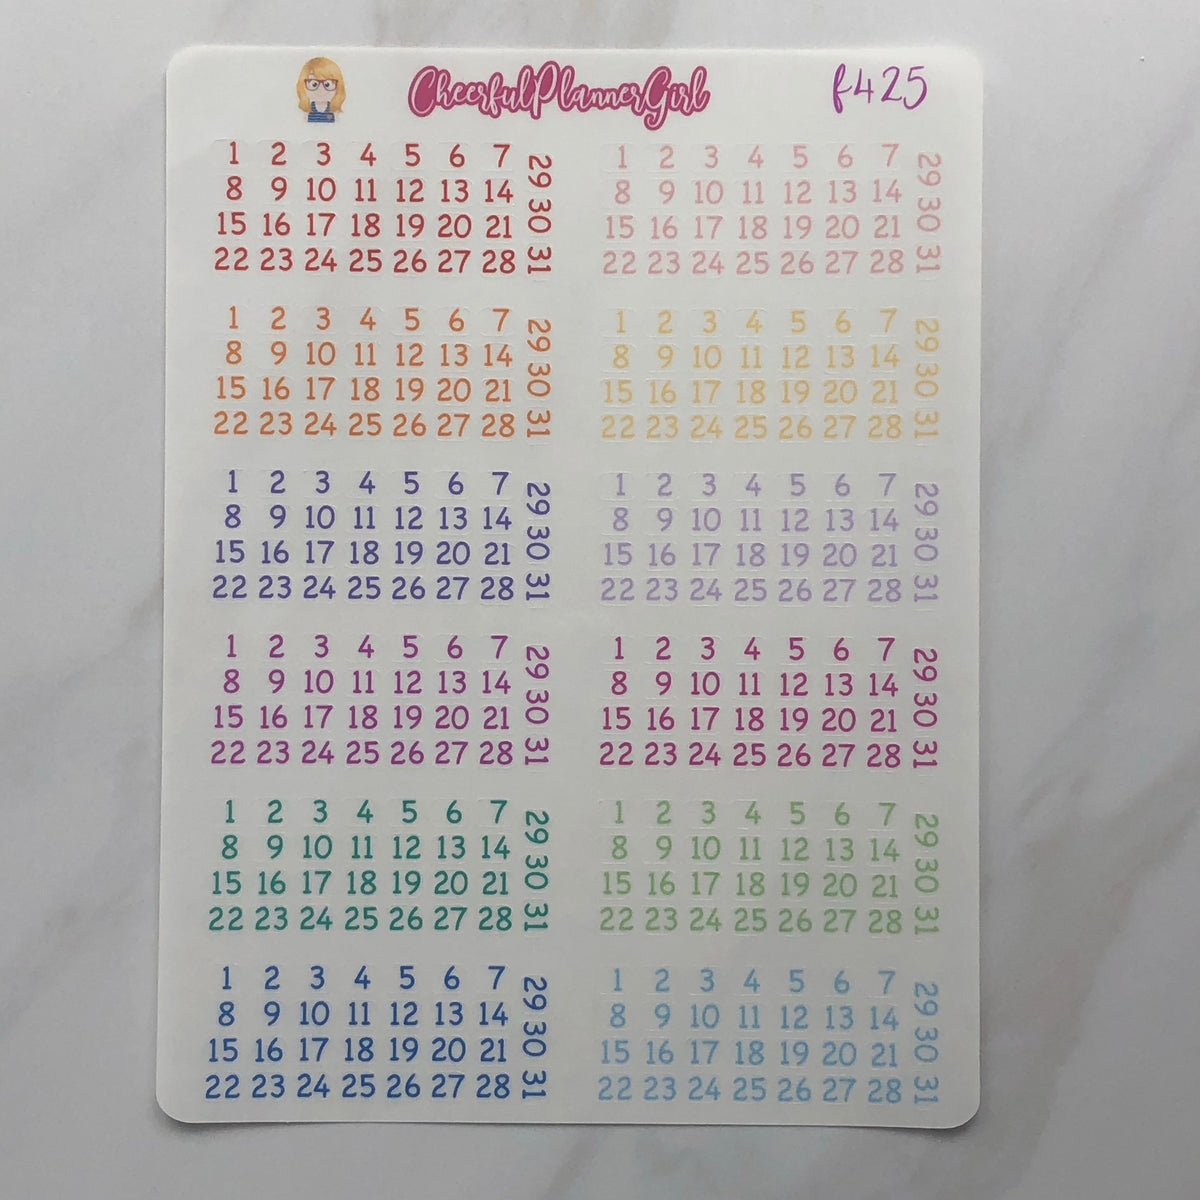  Fantasyon Date Round Dots Stickers, 12 Pcs Colorful Dates  Stickers for Planners, 420 Decorative and Cute Stickers Customizing  Planners Calendars Notebooks to Do Lists(Vintage Style) : Office Products